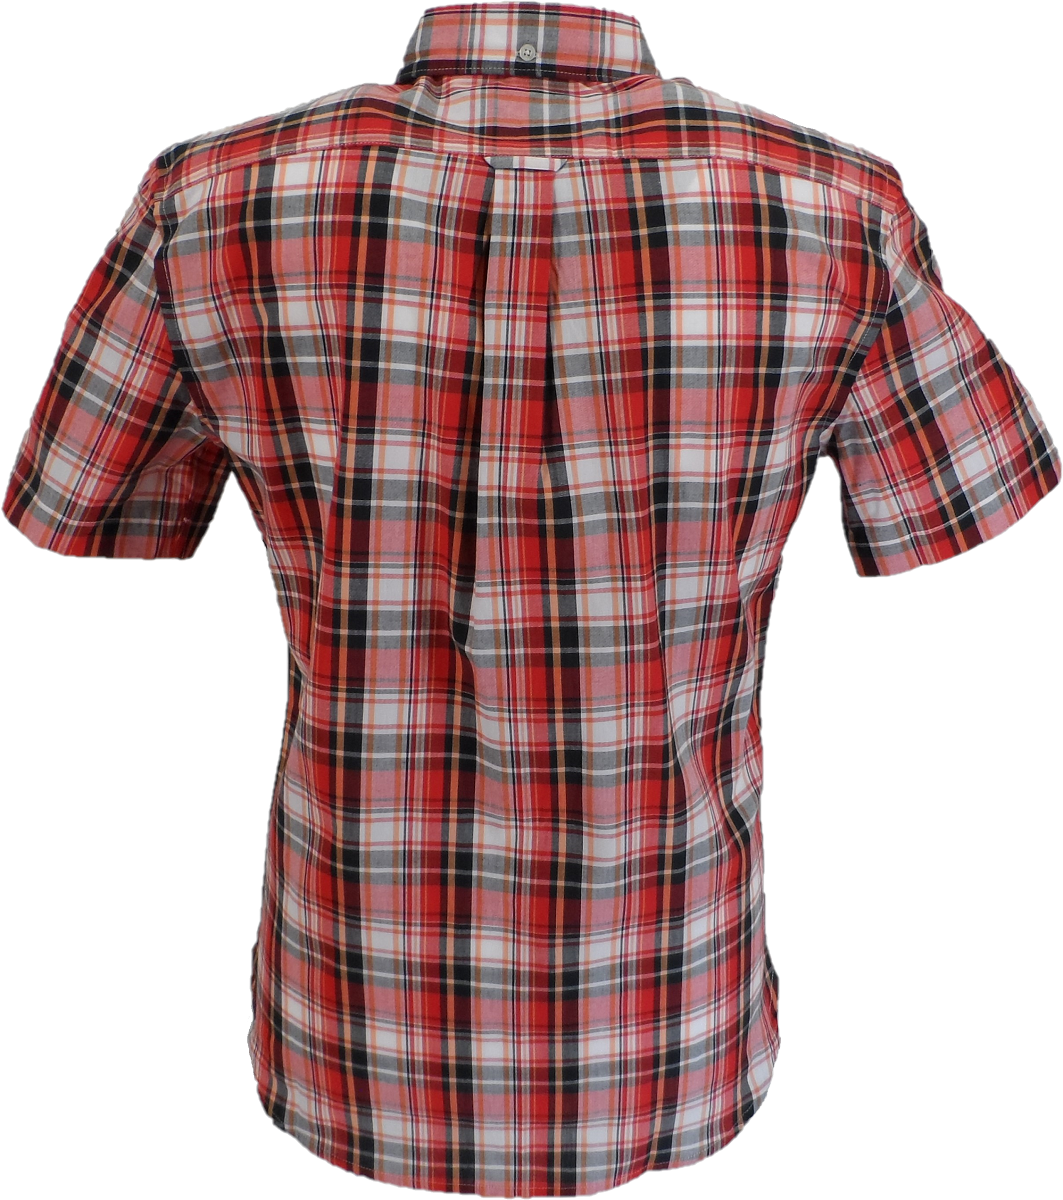 Lambretta Mens Red/White Checked Short Sleeved Button Down Shirts